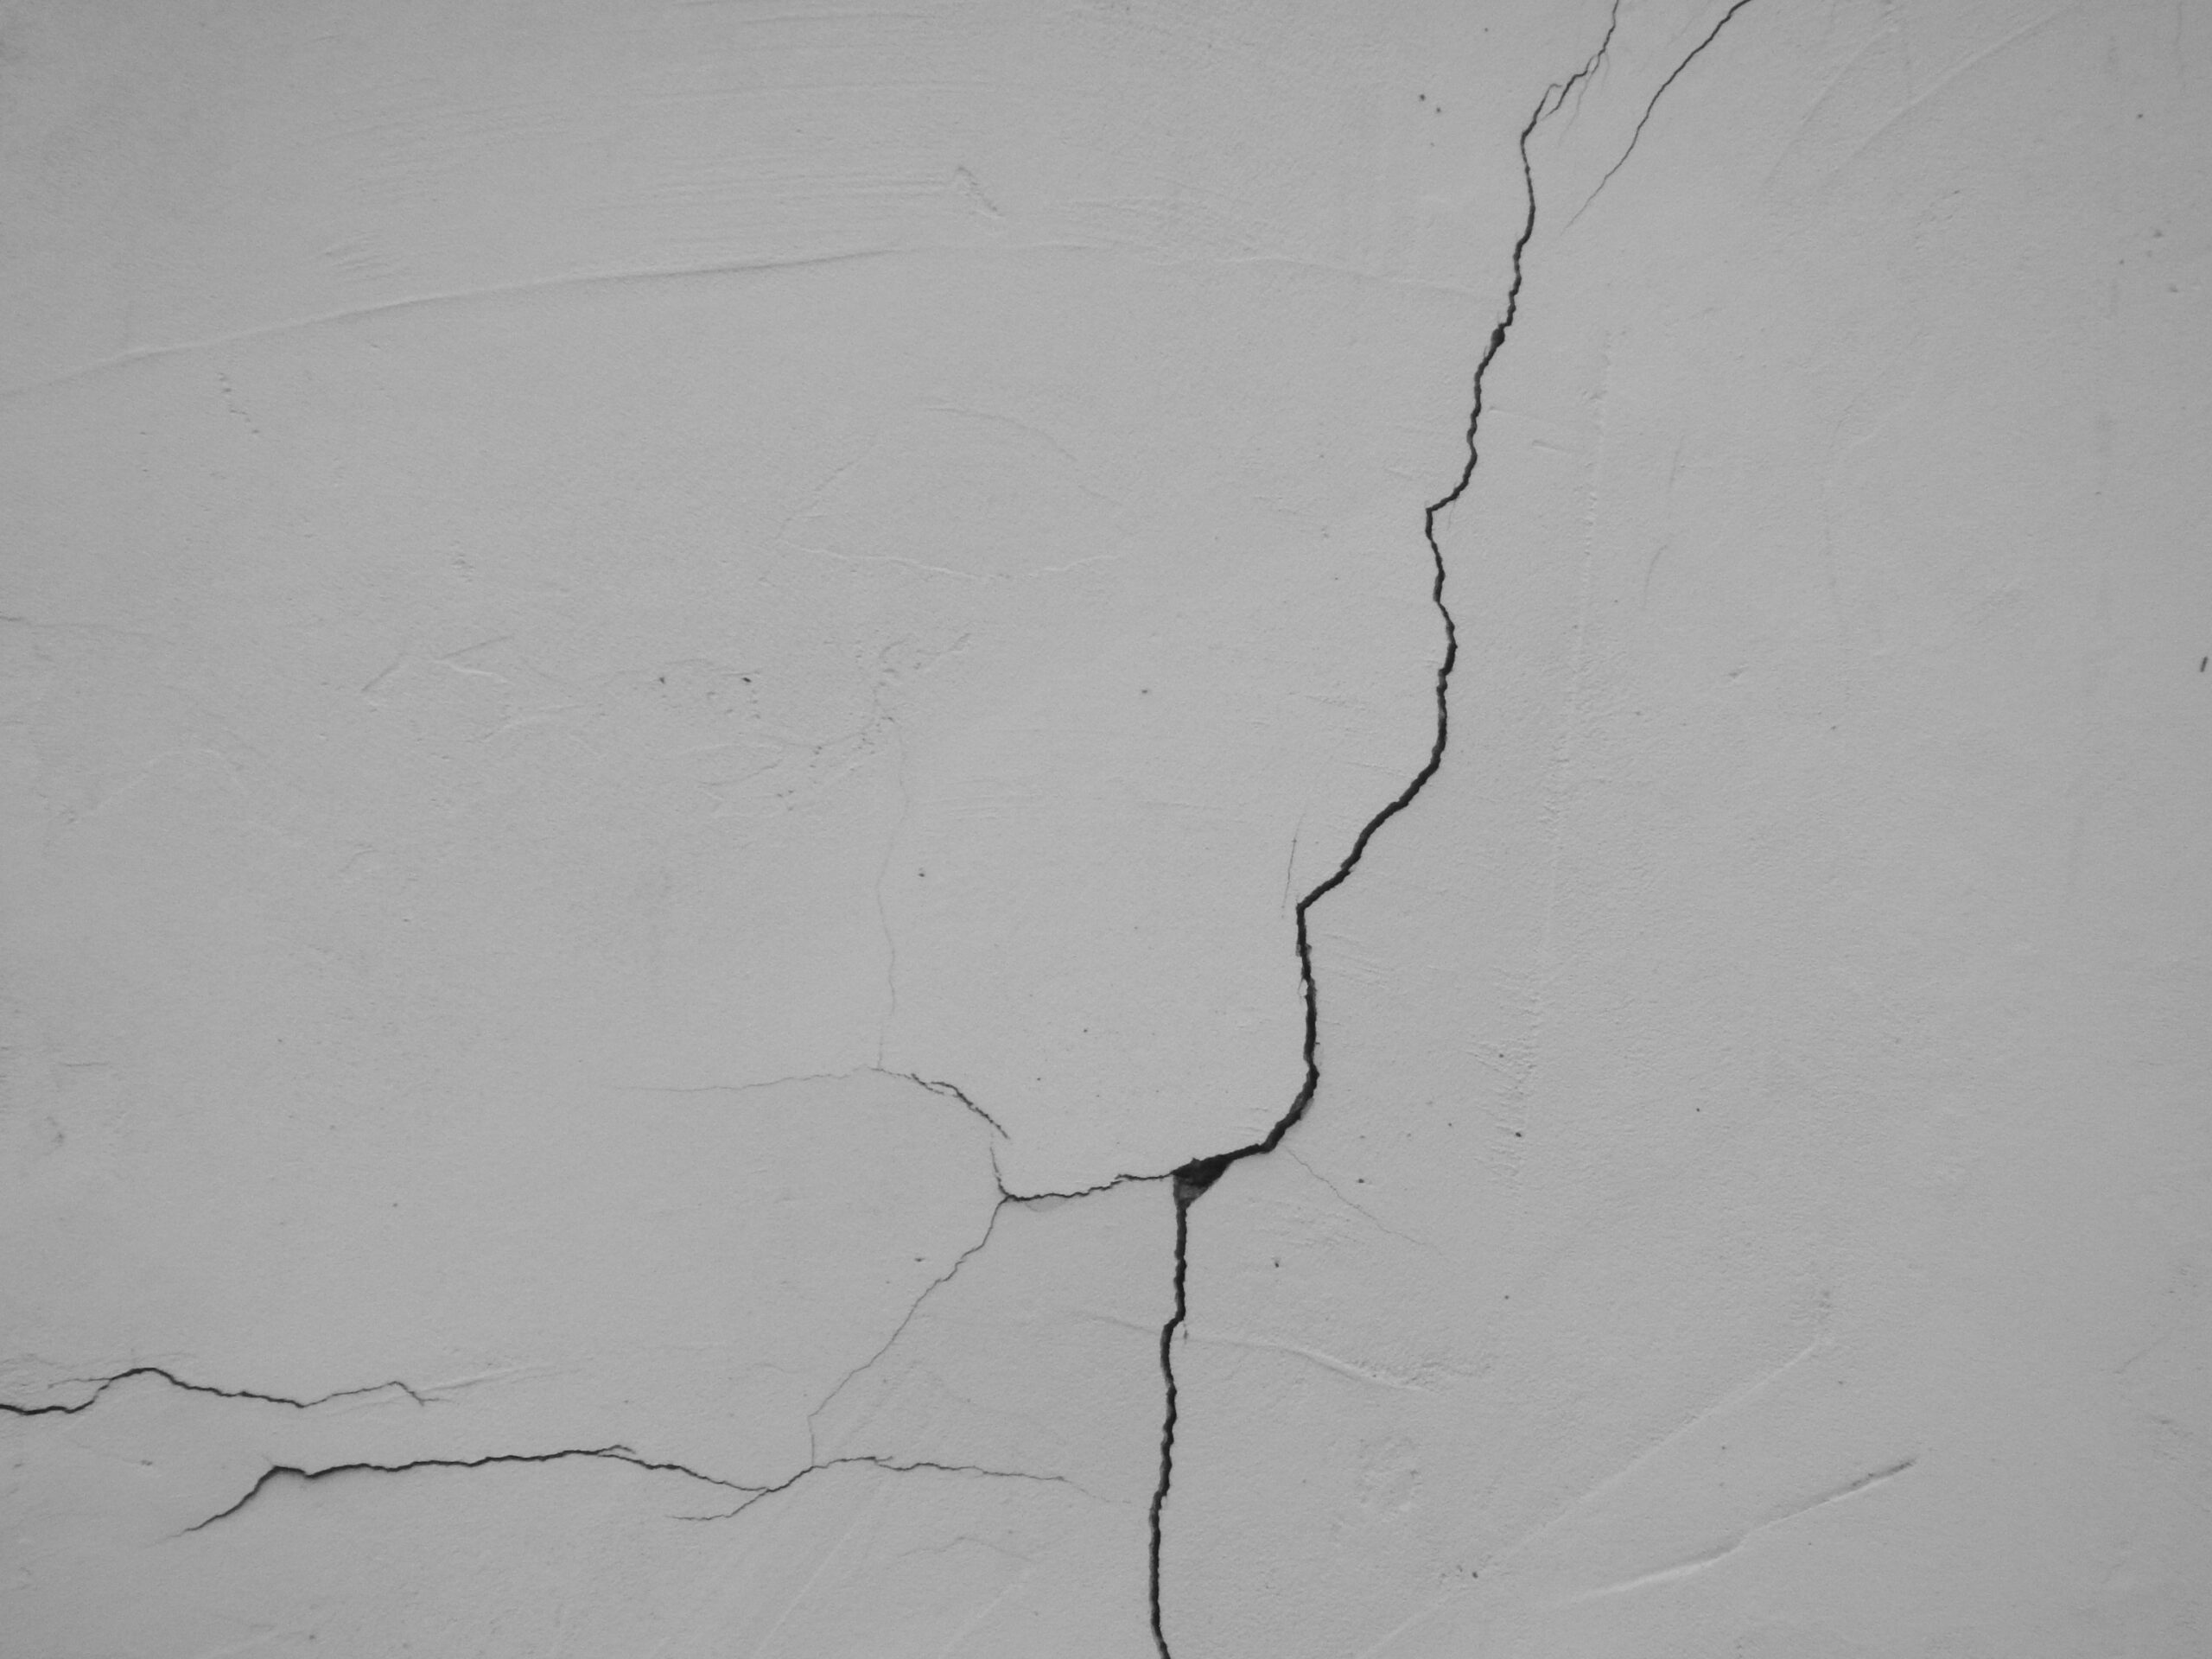 A crack in the wall